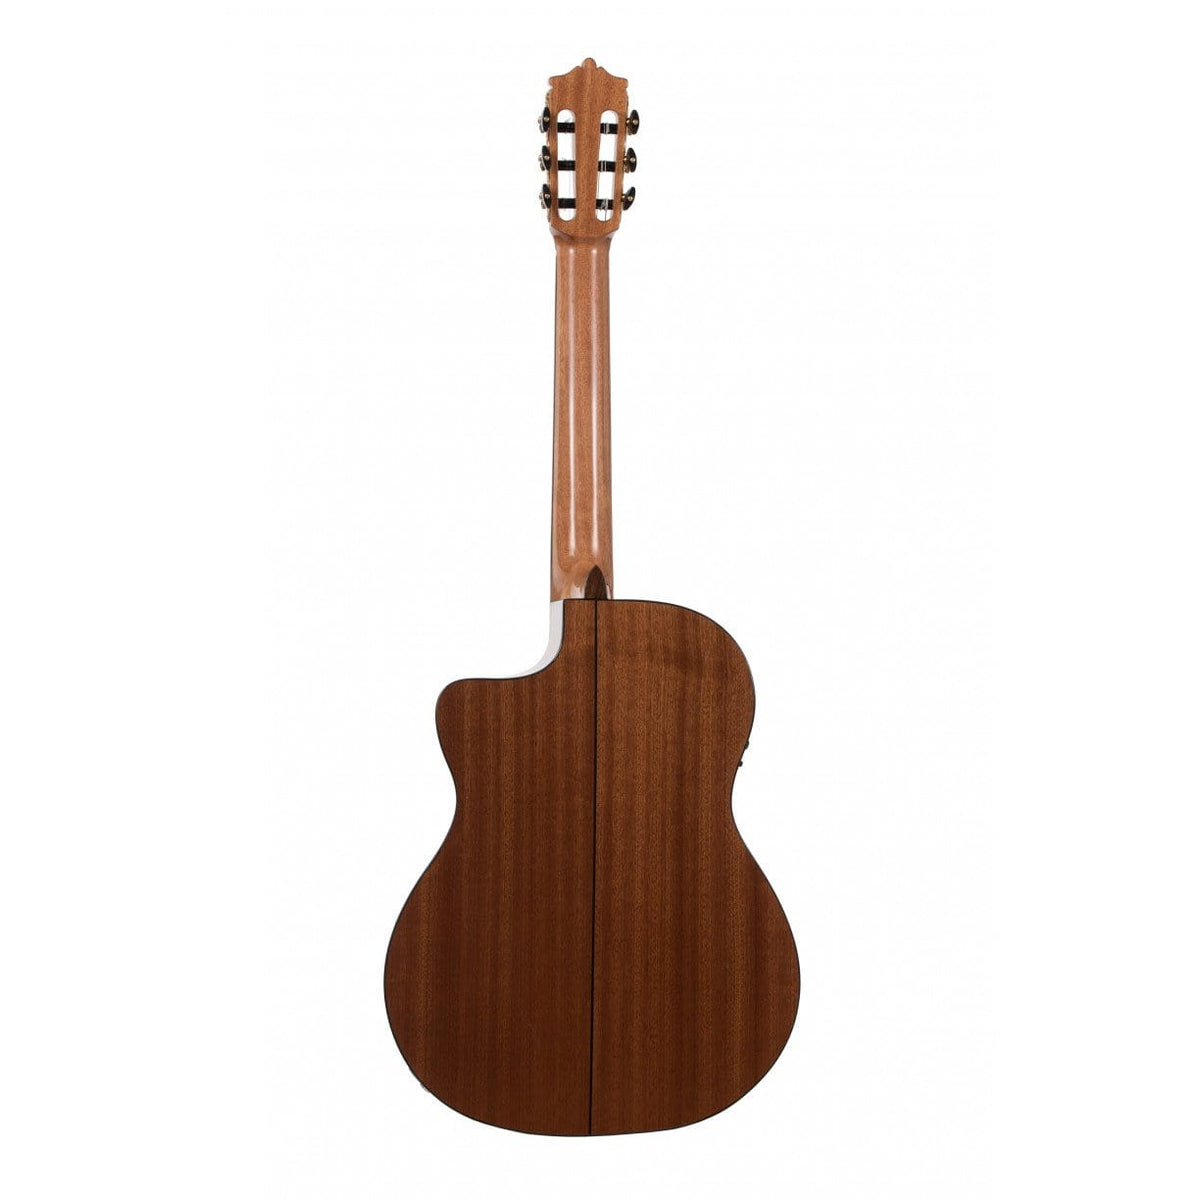 Katoh Guitar Katoh Classical Guitar Solid Spruce Top with Pickup MCG40SEQ - Byron Music